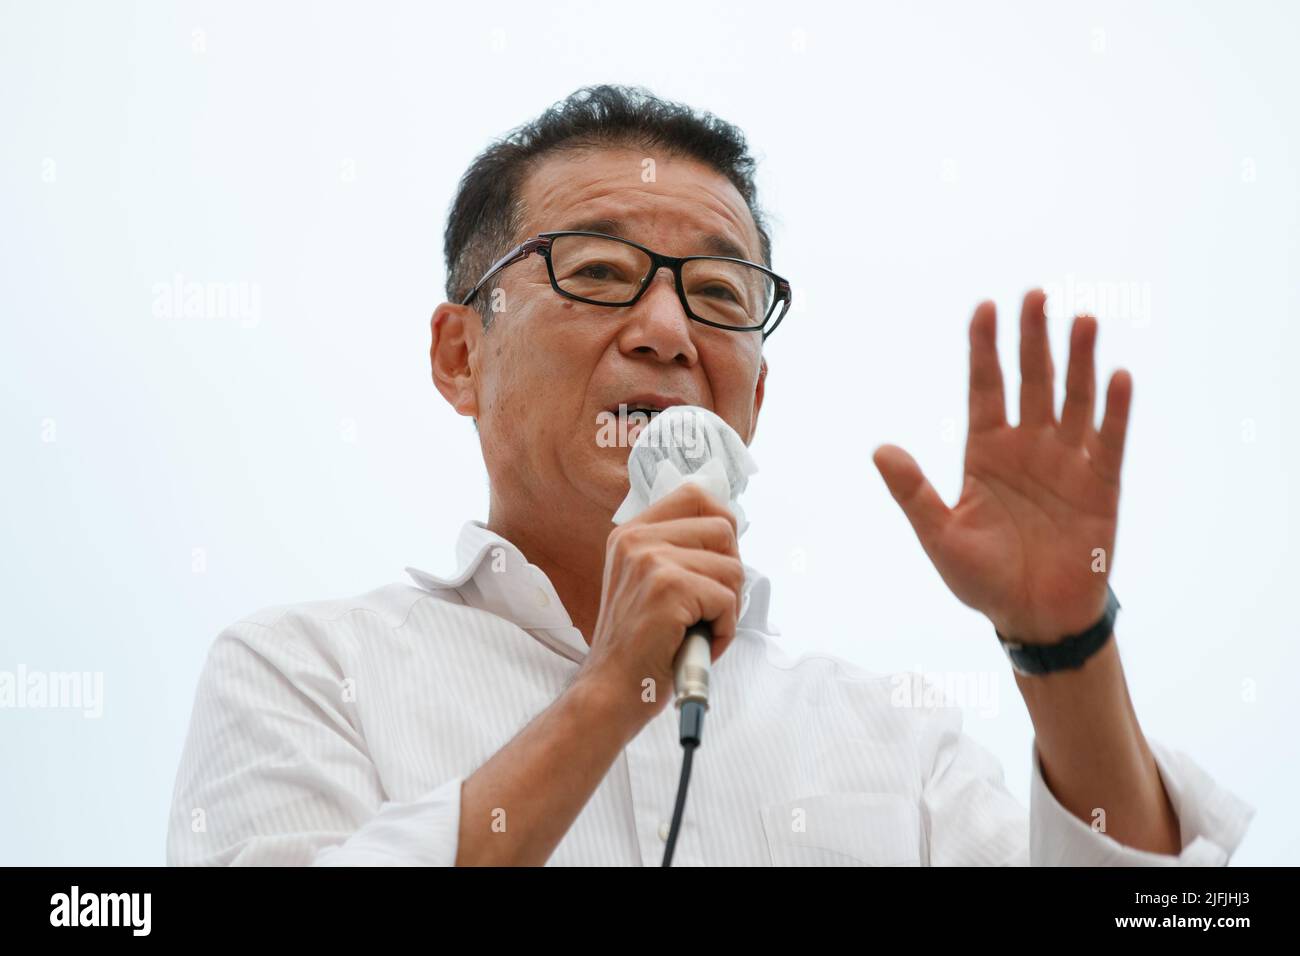 Leader of Japan Innovation Party, Ichiro Matsui appeals to voters to speak in support of the his party's candidates Naoki Inose and Yuki Ebisawa during an Upper House electio campaign in Tokyo, Japan on July, 02, 2022. (Photo Motoo Naka/AFLO) Stock Photo